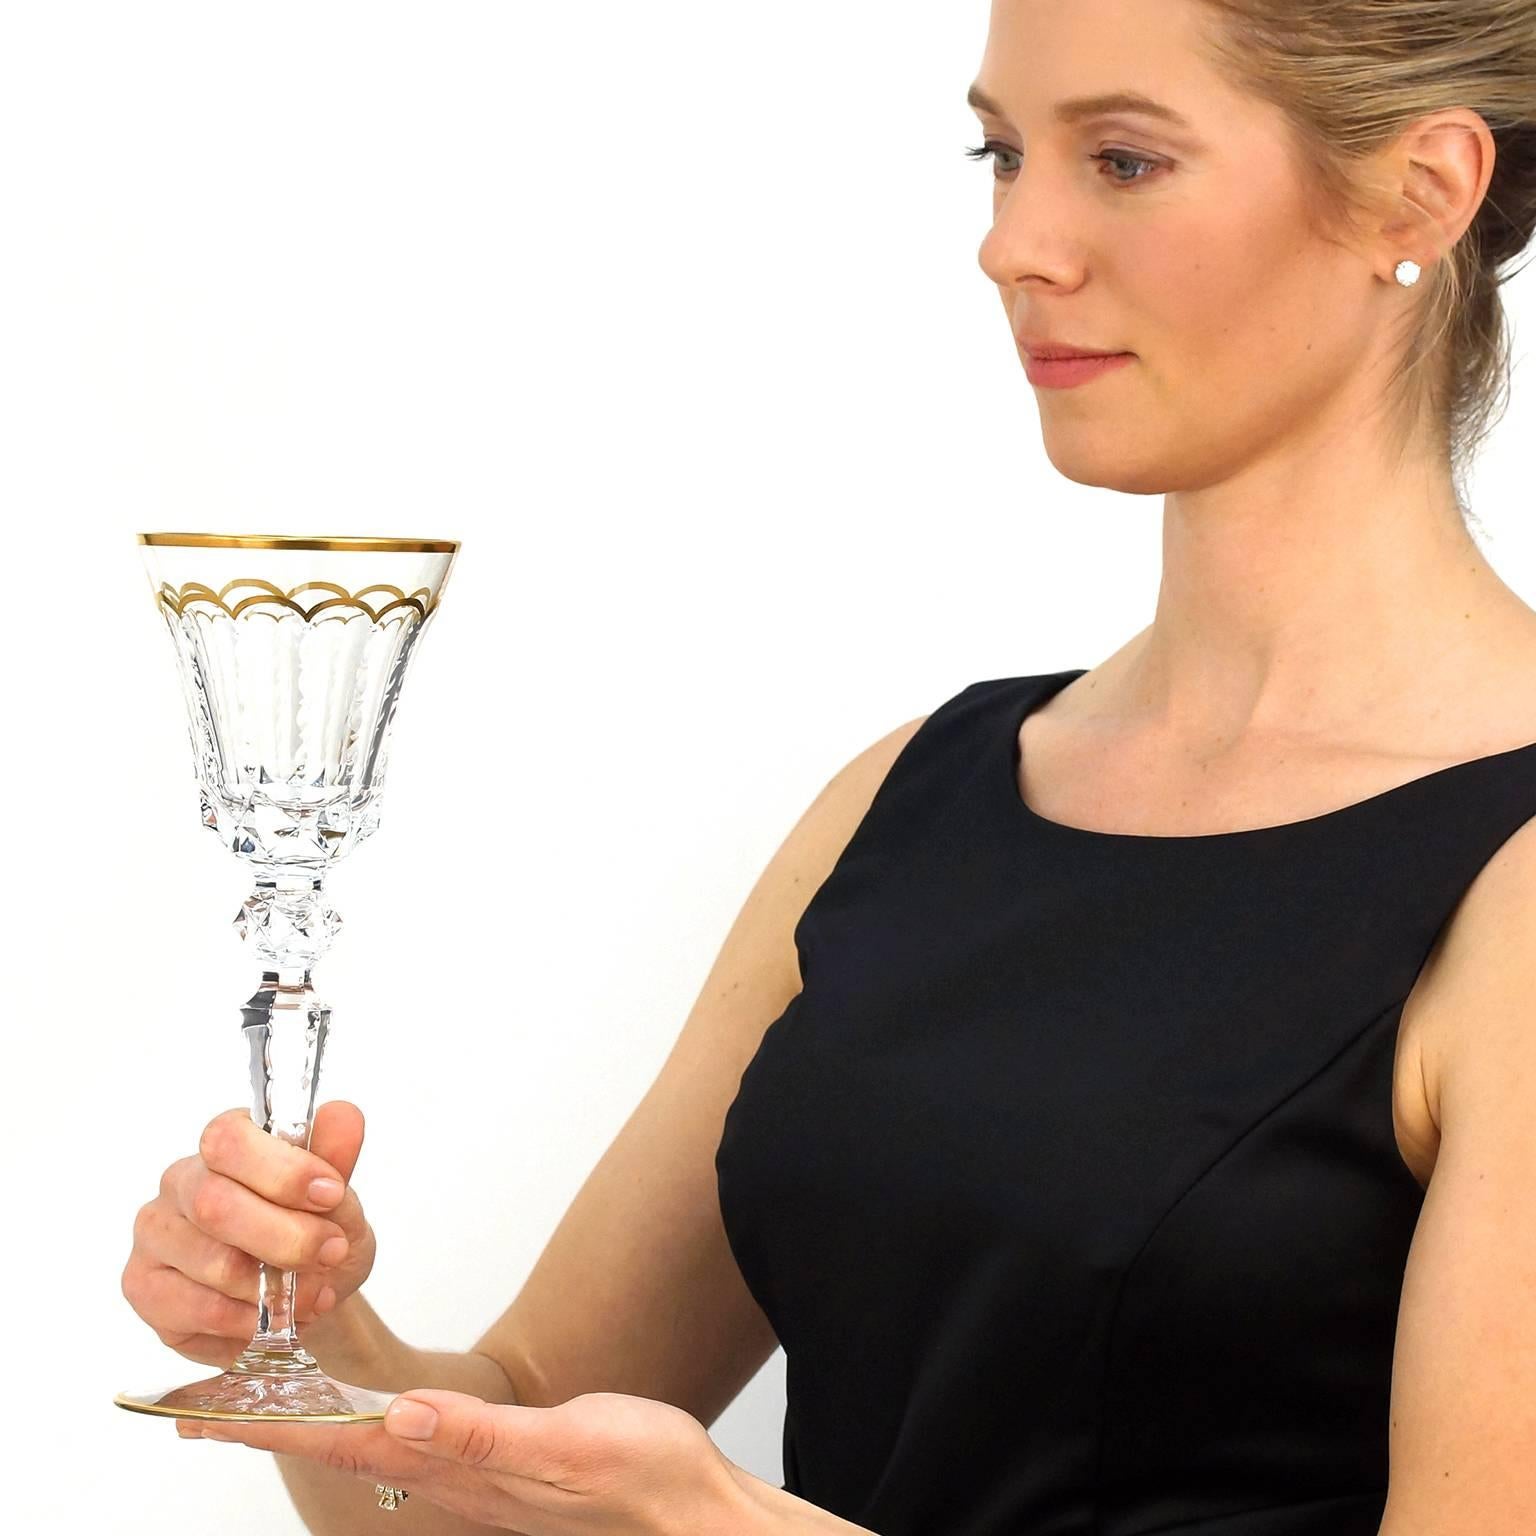 Circa 1967, St. Louis Crystal, France. Magnificently tall, these stunning St. Louis water goblets in the renowned “Excellence” pattern feature a detailed hand-cut pattern, gold trim, and impressive height (over ten inches). Setting a memorable